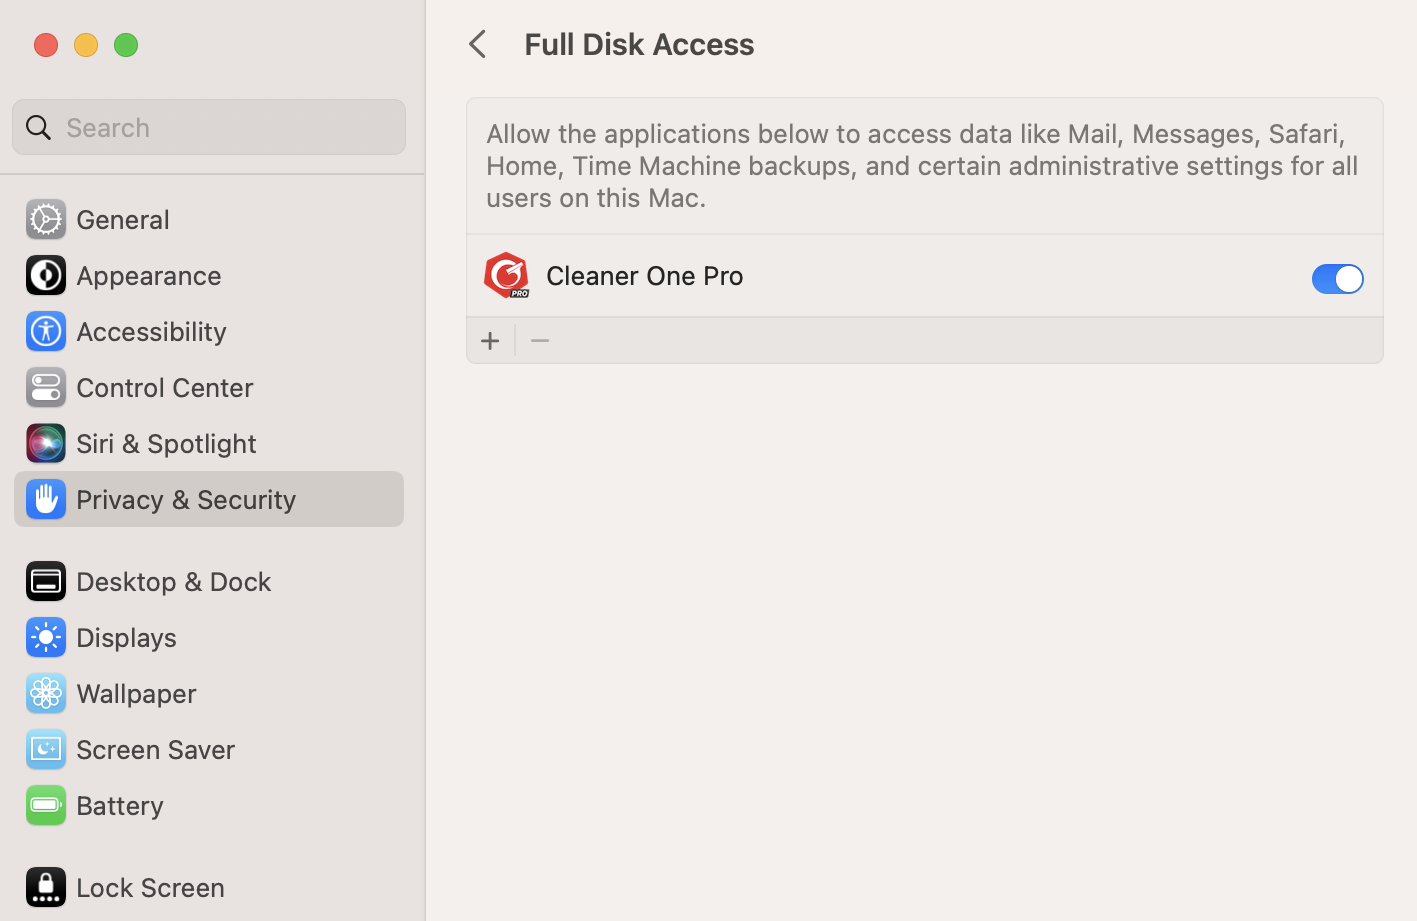 Allow Full Disk Access for Trend Micro Cleaner One Pro